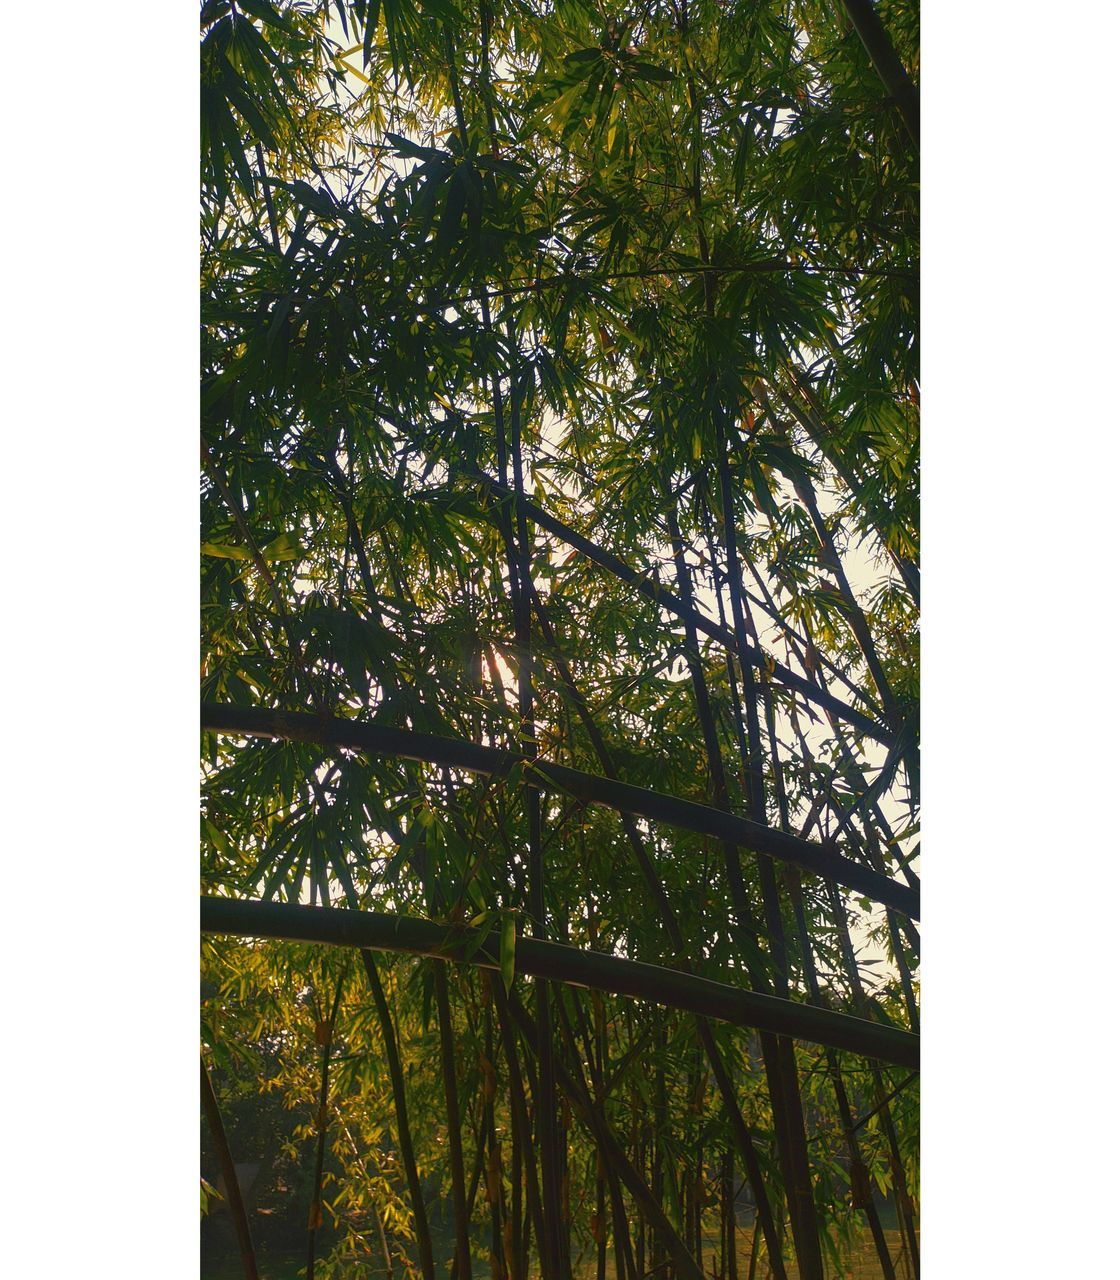 tree, plant, branch, growth, nature, no people, day, leaf, low angle view, green, outdoors, sky, transfer print, beauty in nature, architecture, auto post production filter, sunlight, tranquility, built structure